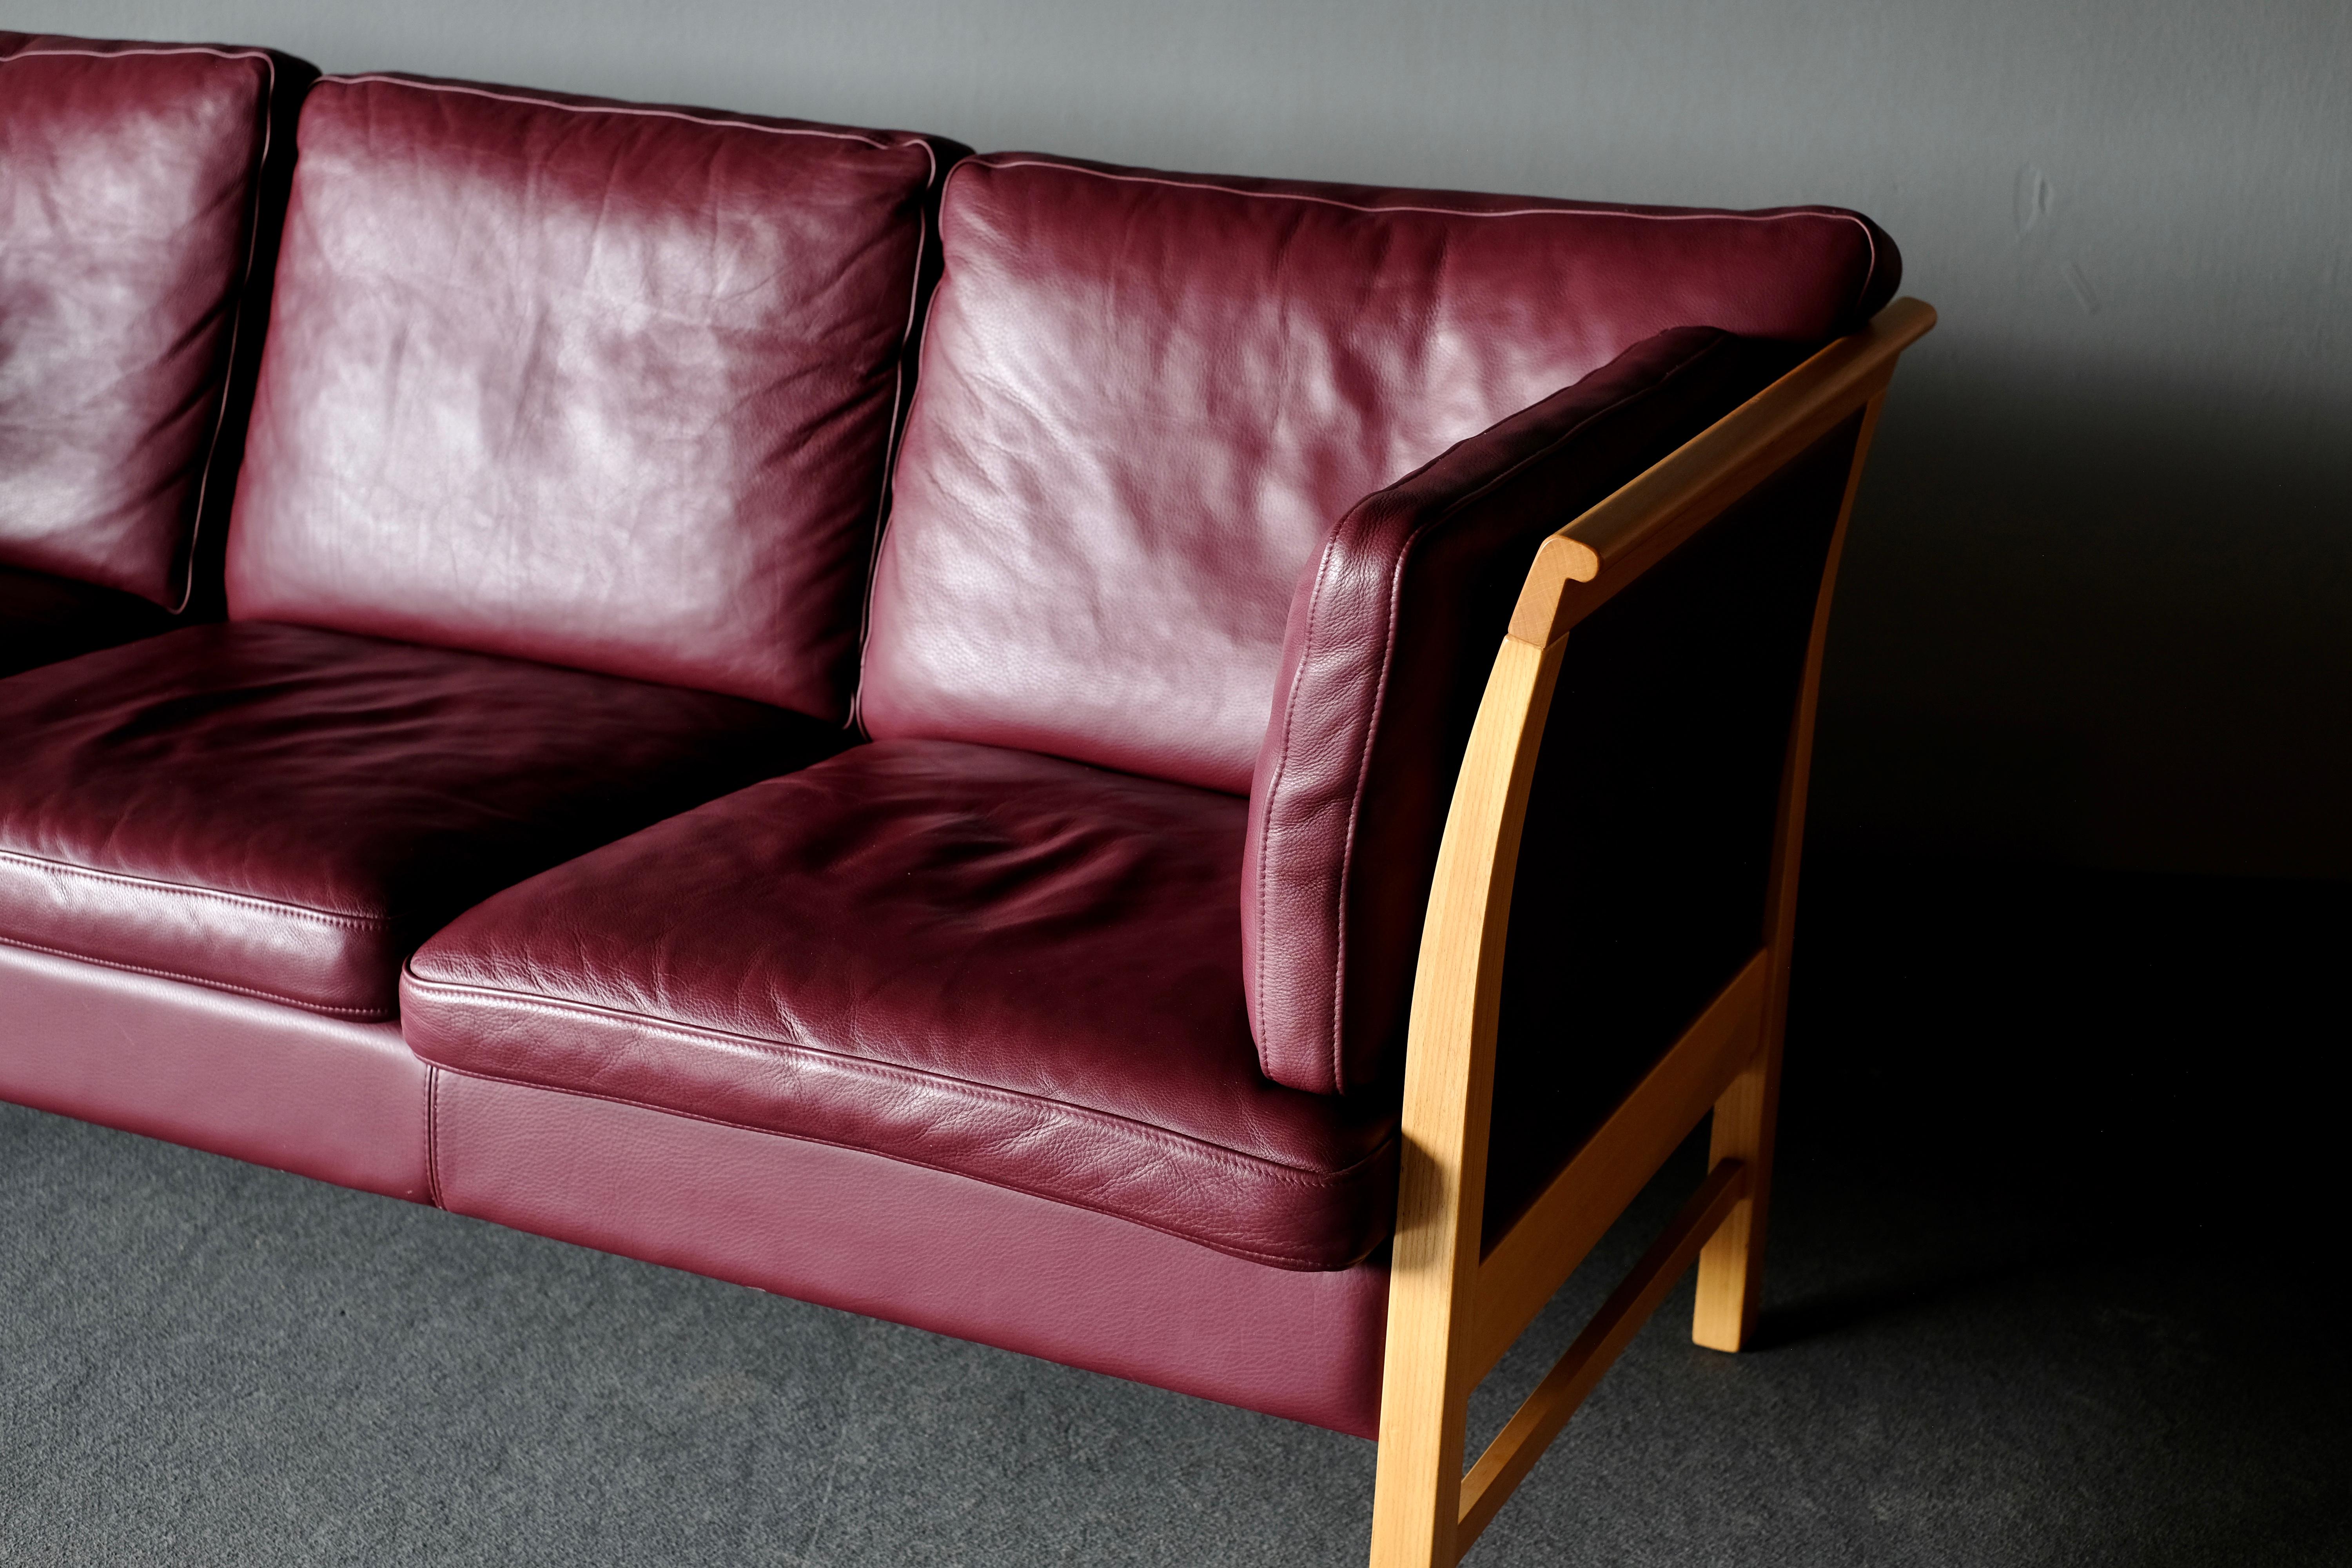 Generously proportioned 3-seat sofa with loose cushions upholstered in leather.